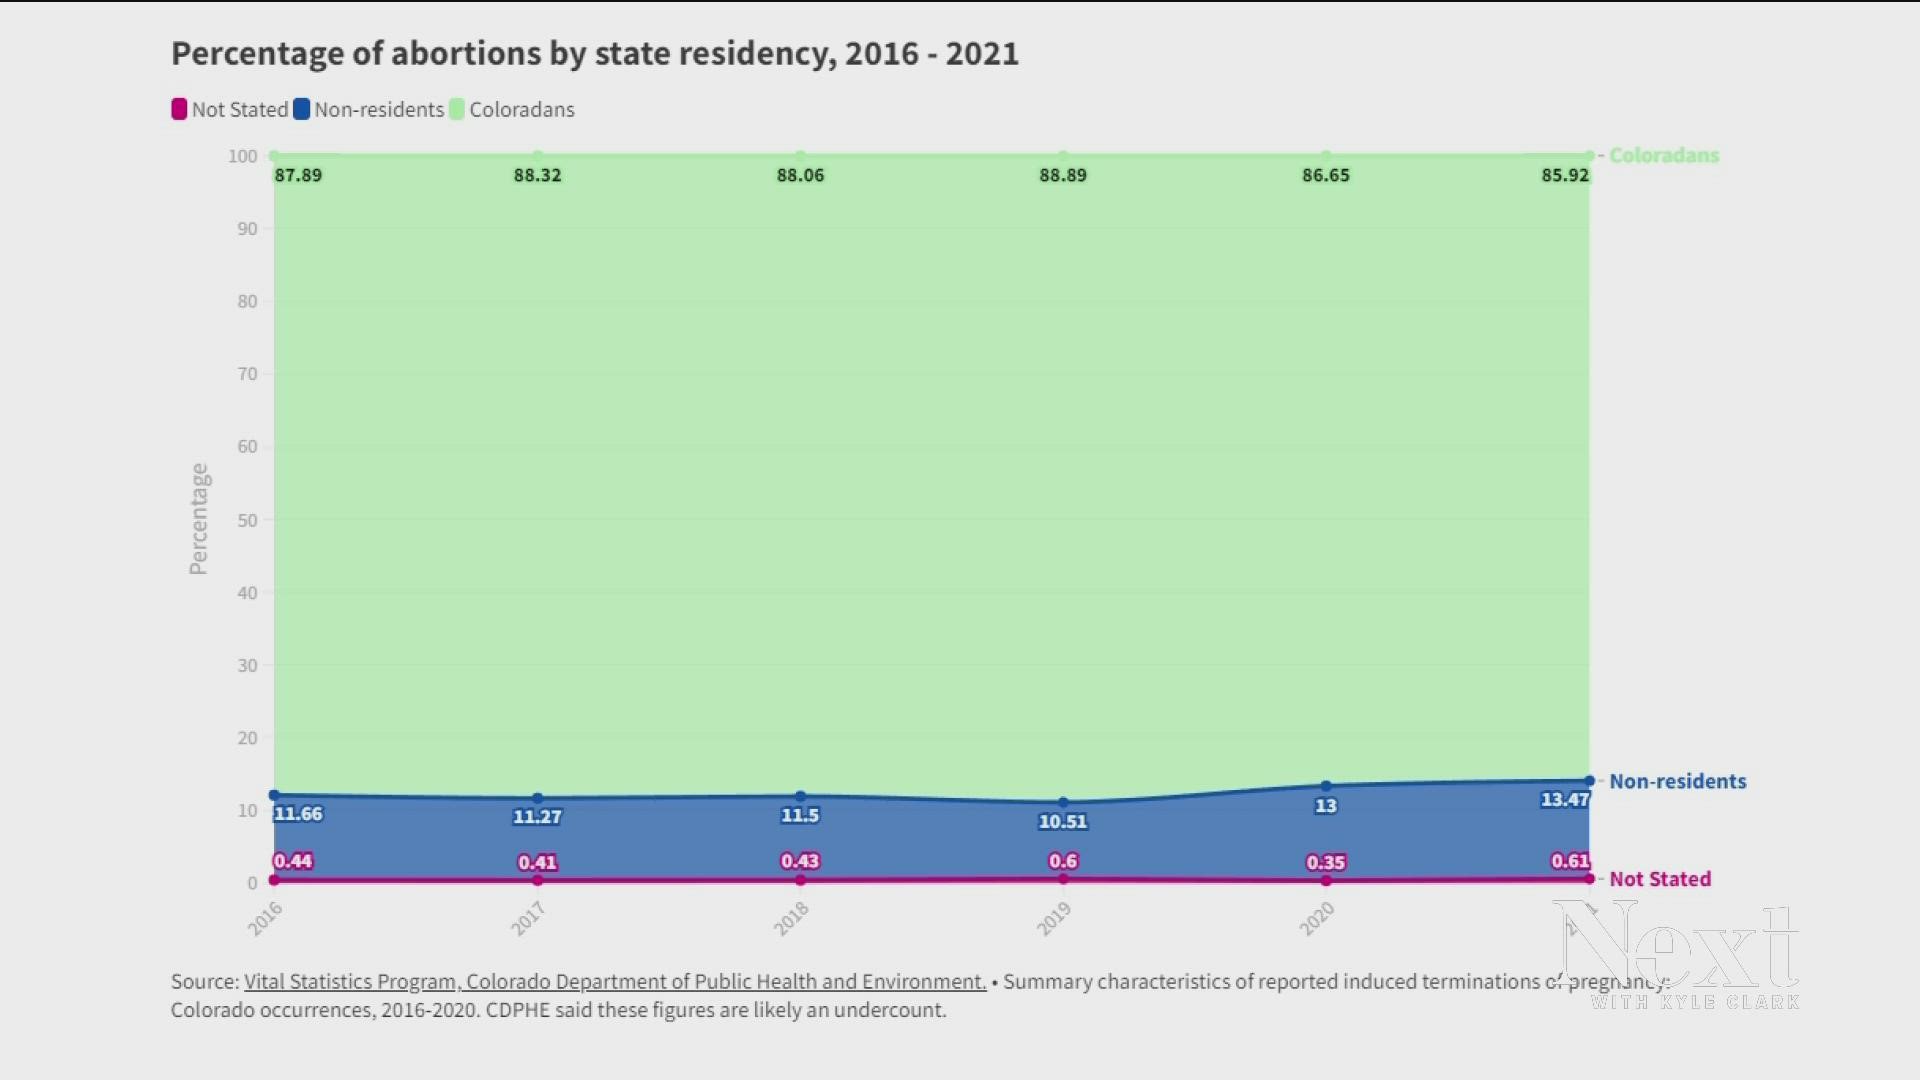 More people who live outside of Colorado came to the state to get an abortion in 2021, up to about 13.5% of all abortions in the state.